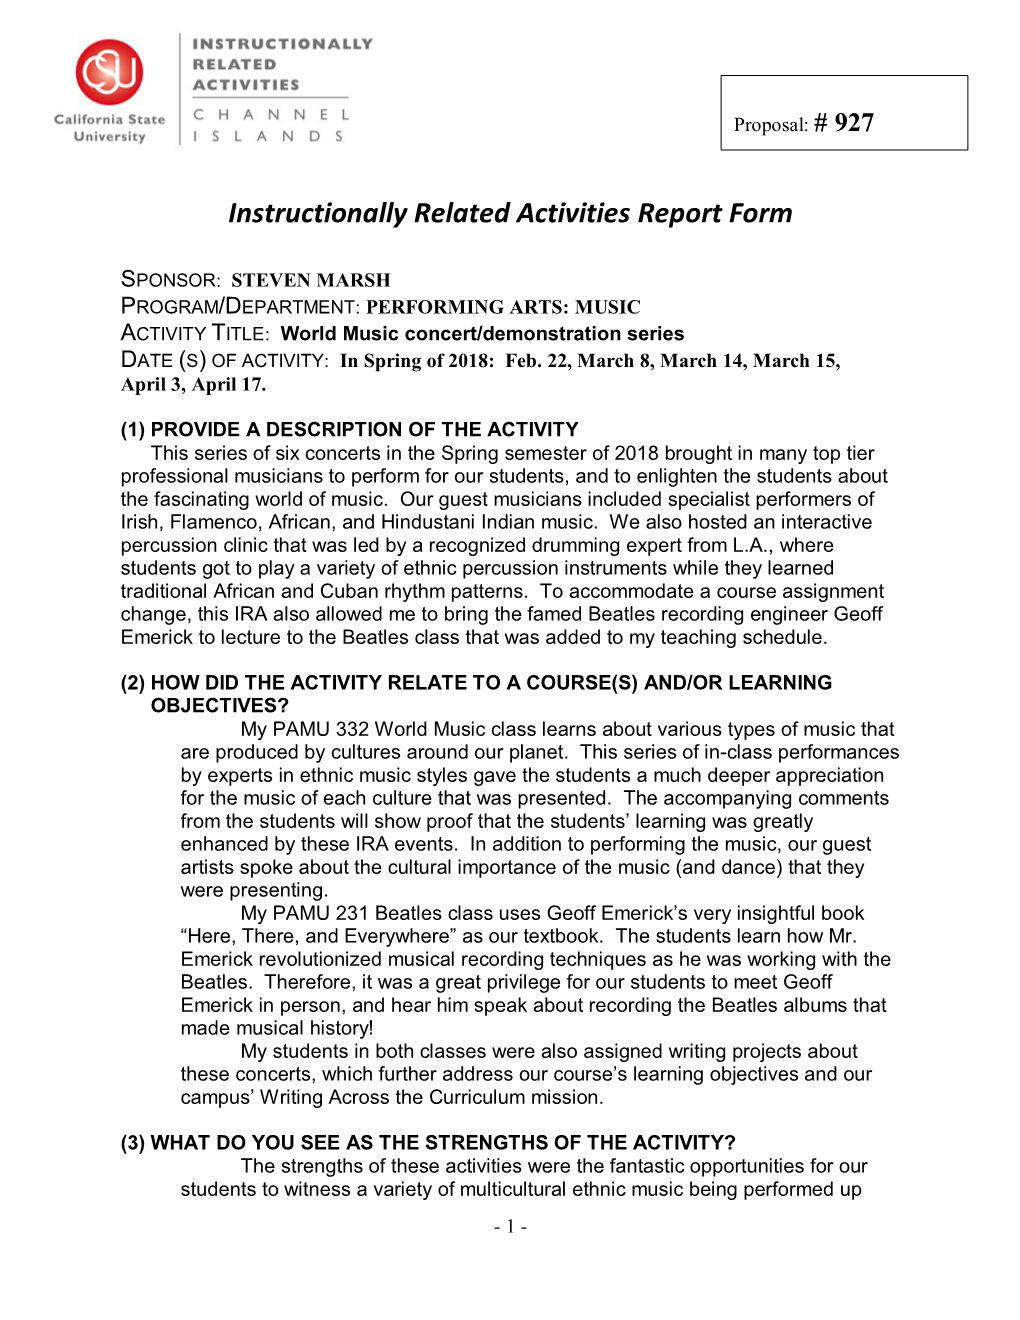 Instructionally Related Activities Report Form